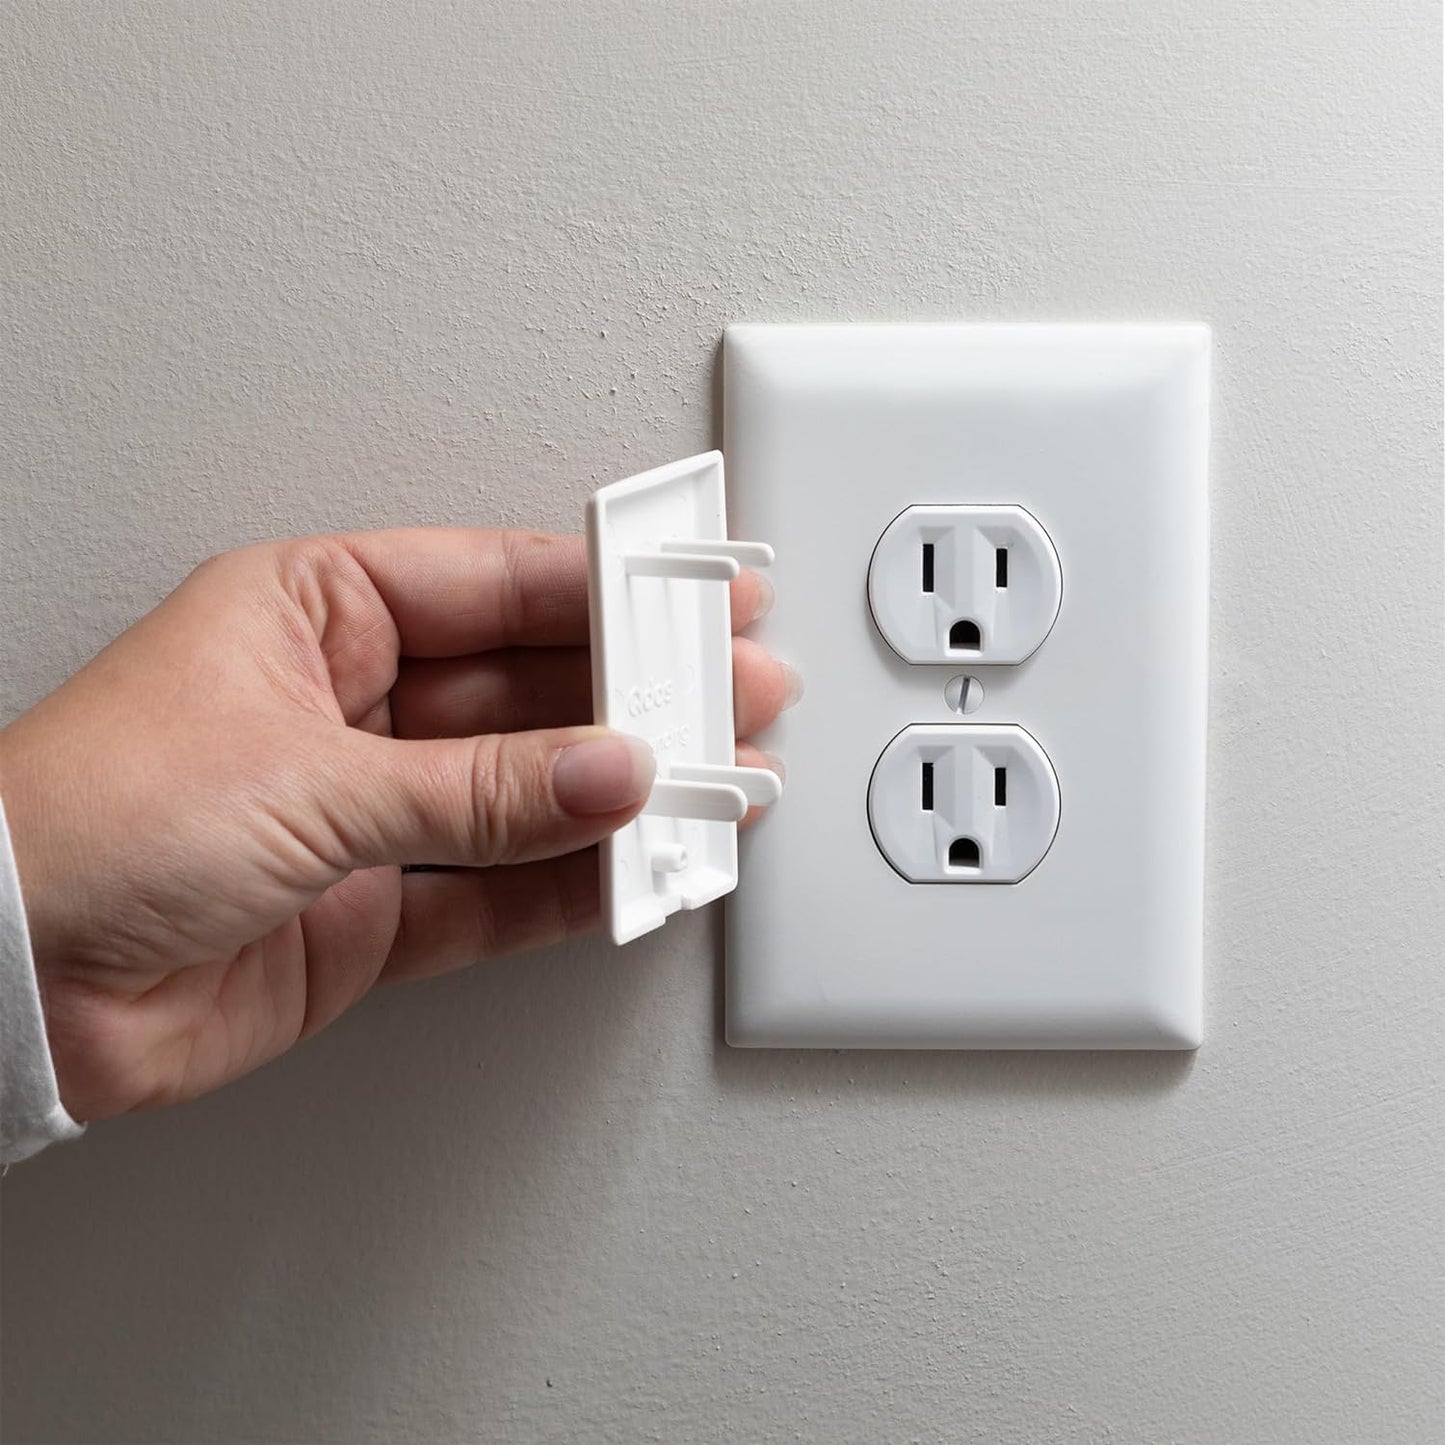 Qdos Safety StayPut Double Outlet Plug Cover - One Plug Covers both Outlets! Secure Fit and Beveled Edges Prevent Small Fingers from Removing Unlike Other Products| Fits All Outlets | 6 pack | White